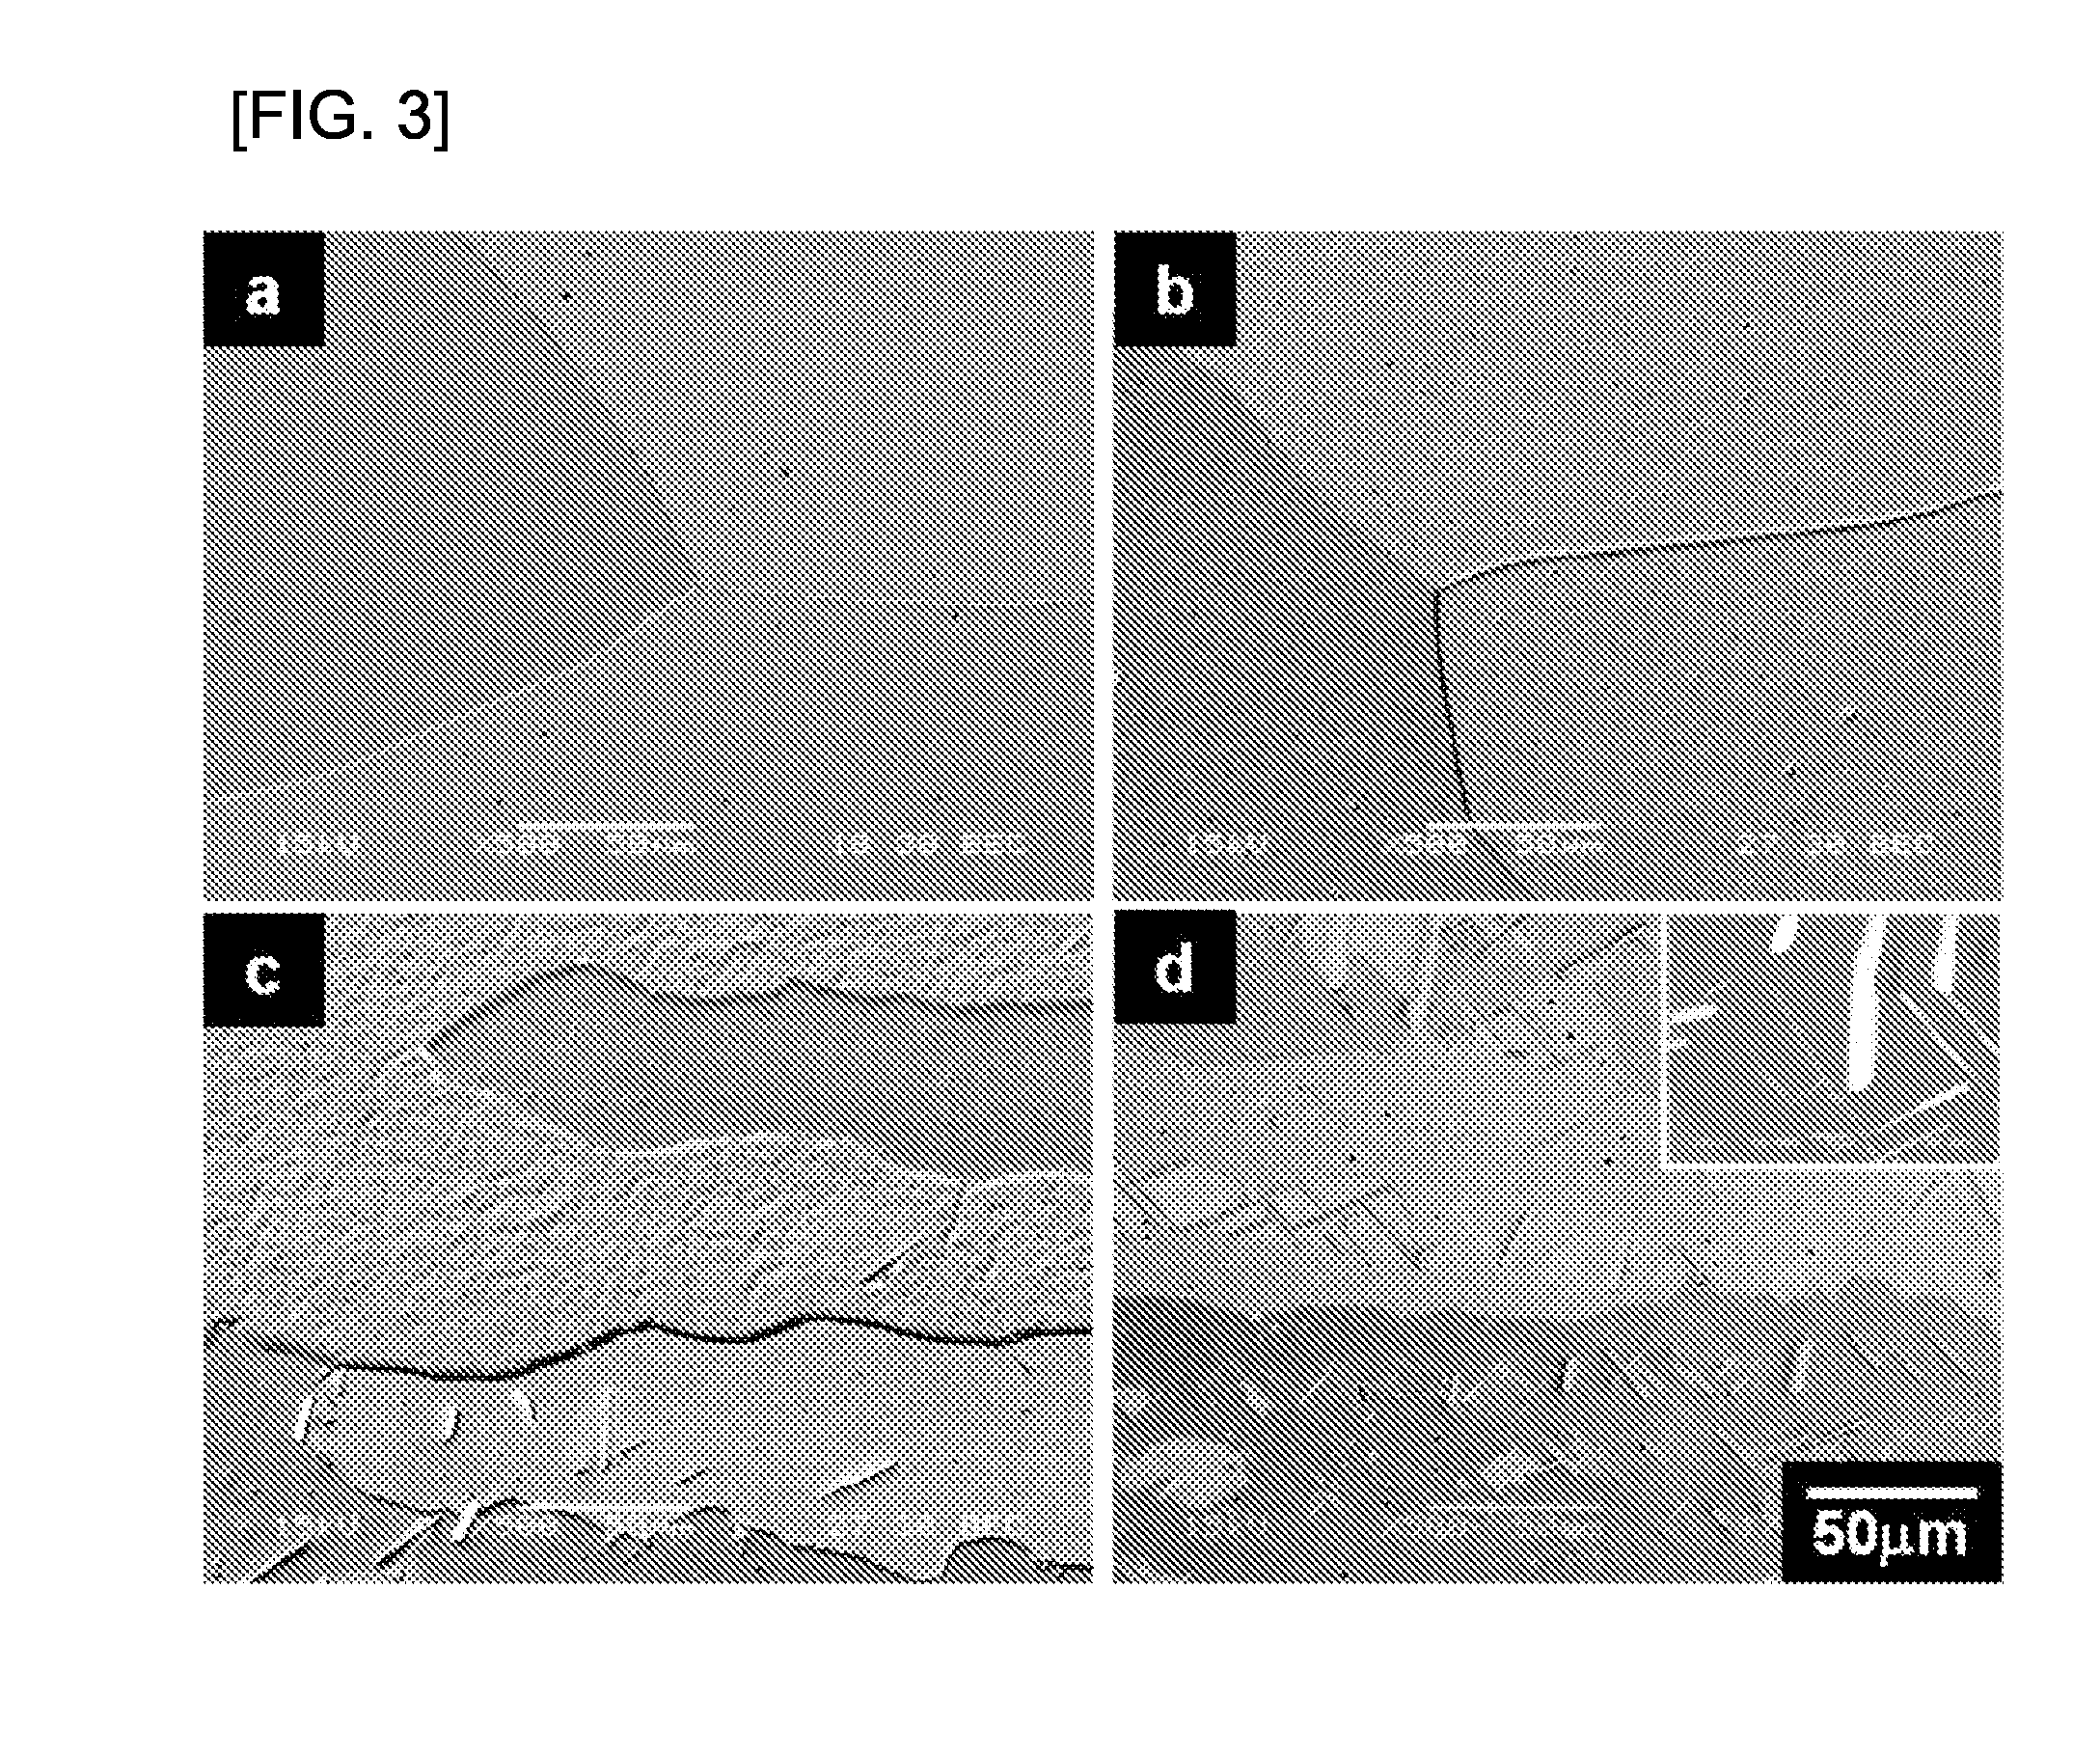 HEAT-RESISTANT BEARING FORMED OF Ta OR A1-ADDED Ni3(Si, Ti)-BASED INTERMETALLIC COMPOUND ALLOY AND METHOD FOR PRODUCING THE SAME